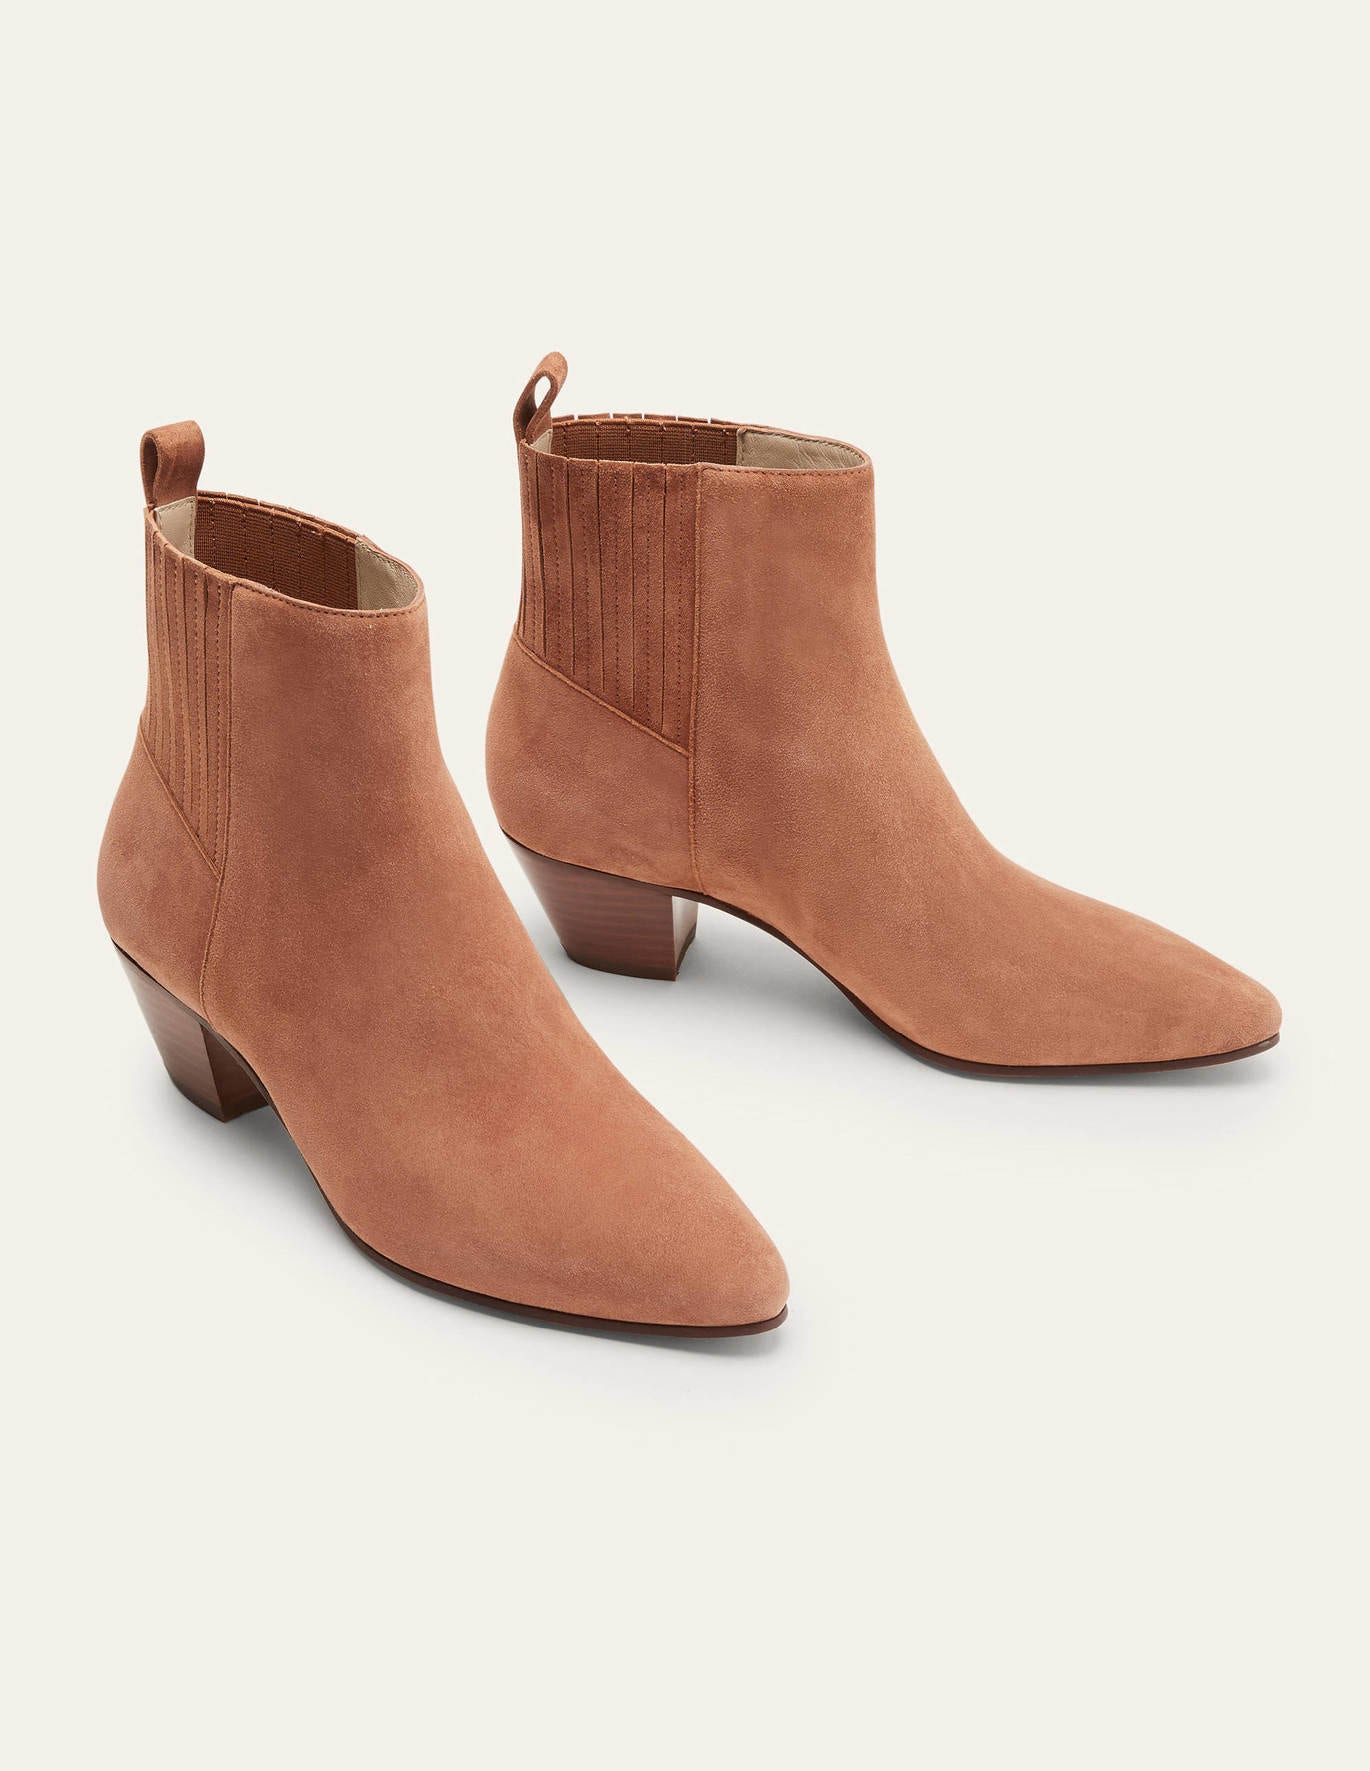 Boden Western Ankle Boots - Tan